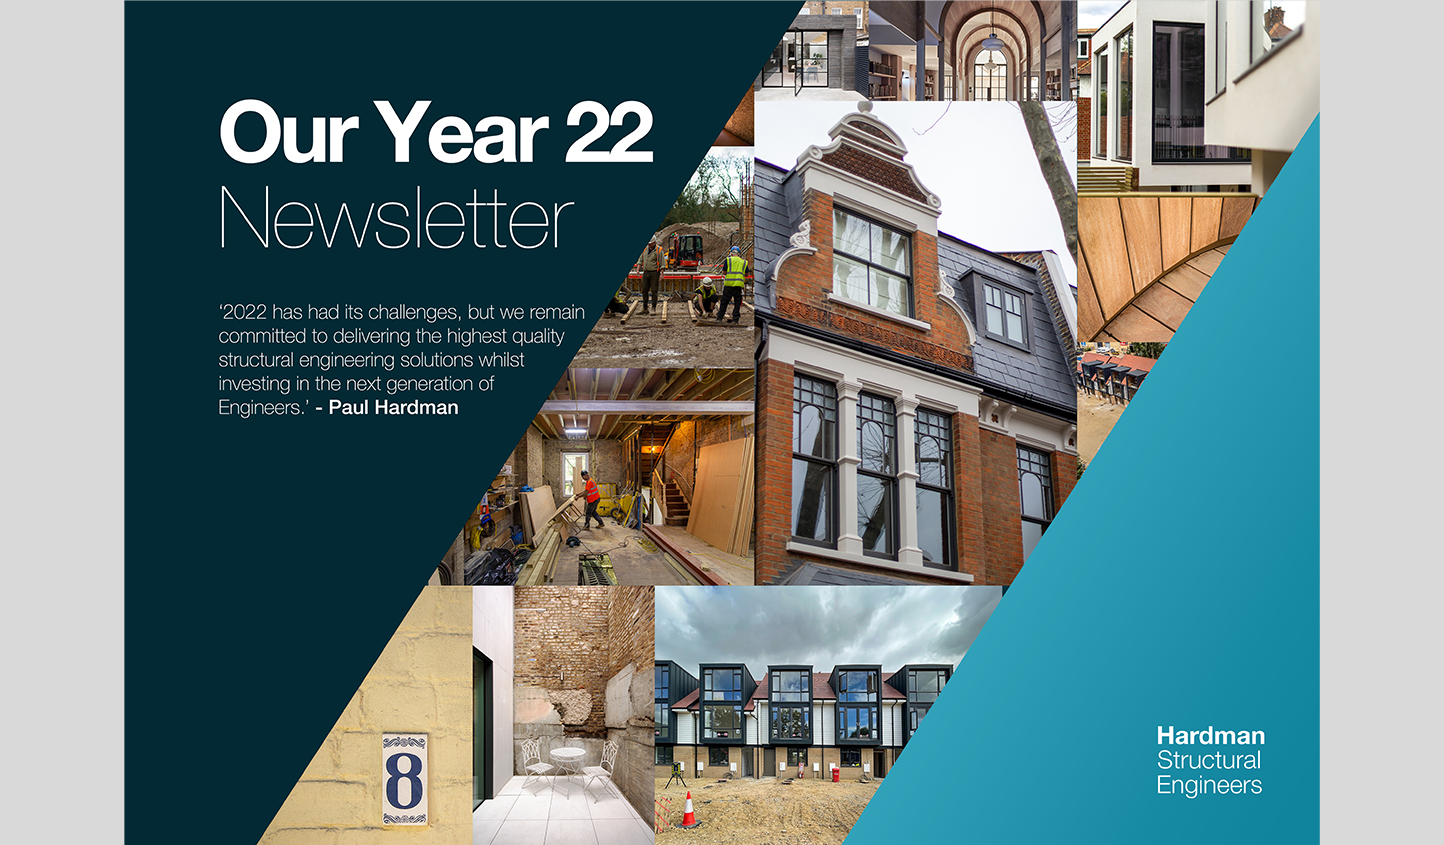 Our Year 22 - Newsletter